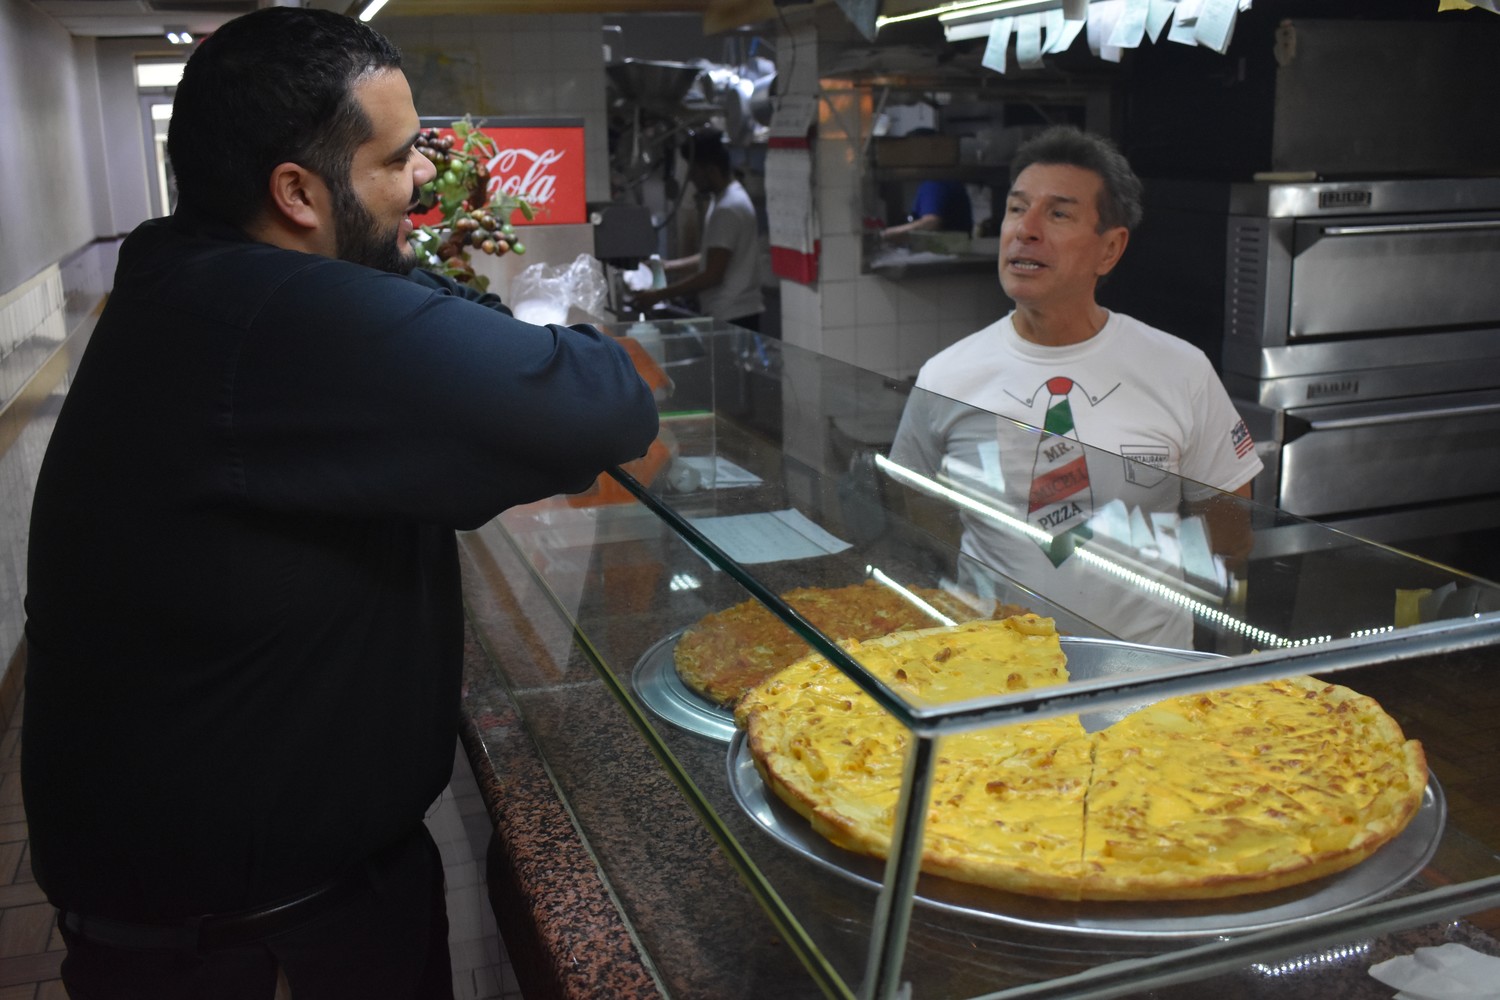 Luca Miceli, owner of Mr. Miceli Pizza, above, chatted with customer Joel Fernandez a day before Miceli closed his shop. “It was a pleasure,” Fernandez told him with a handshake before leaving.